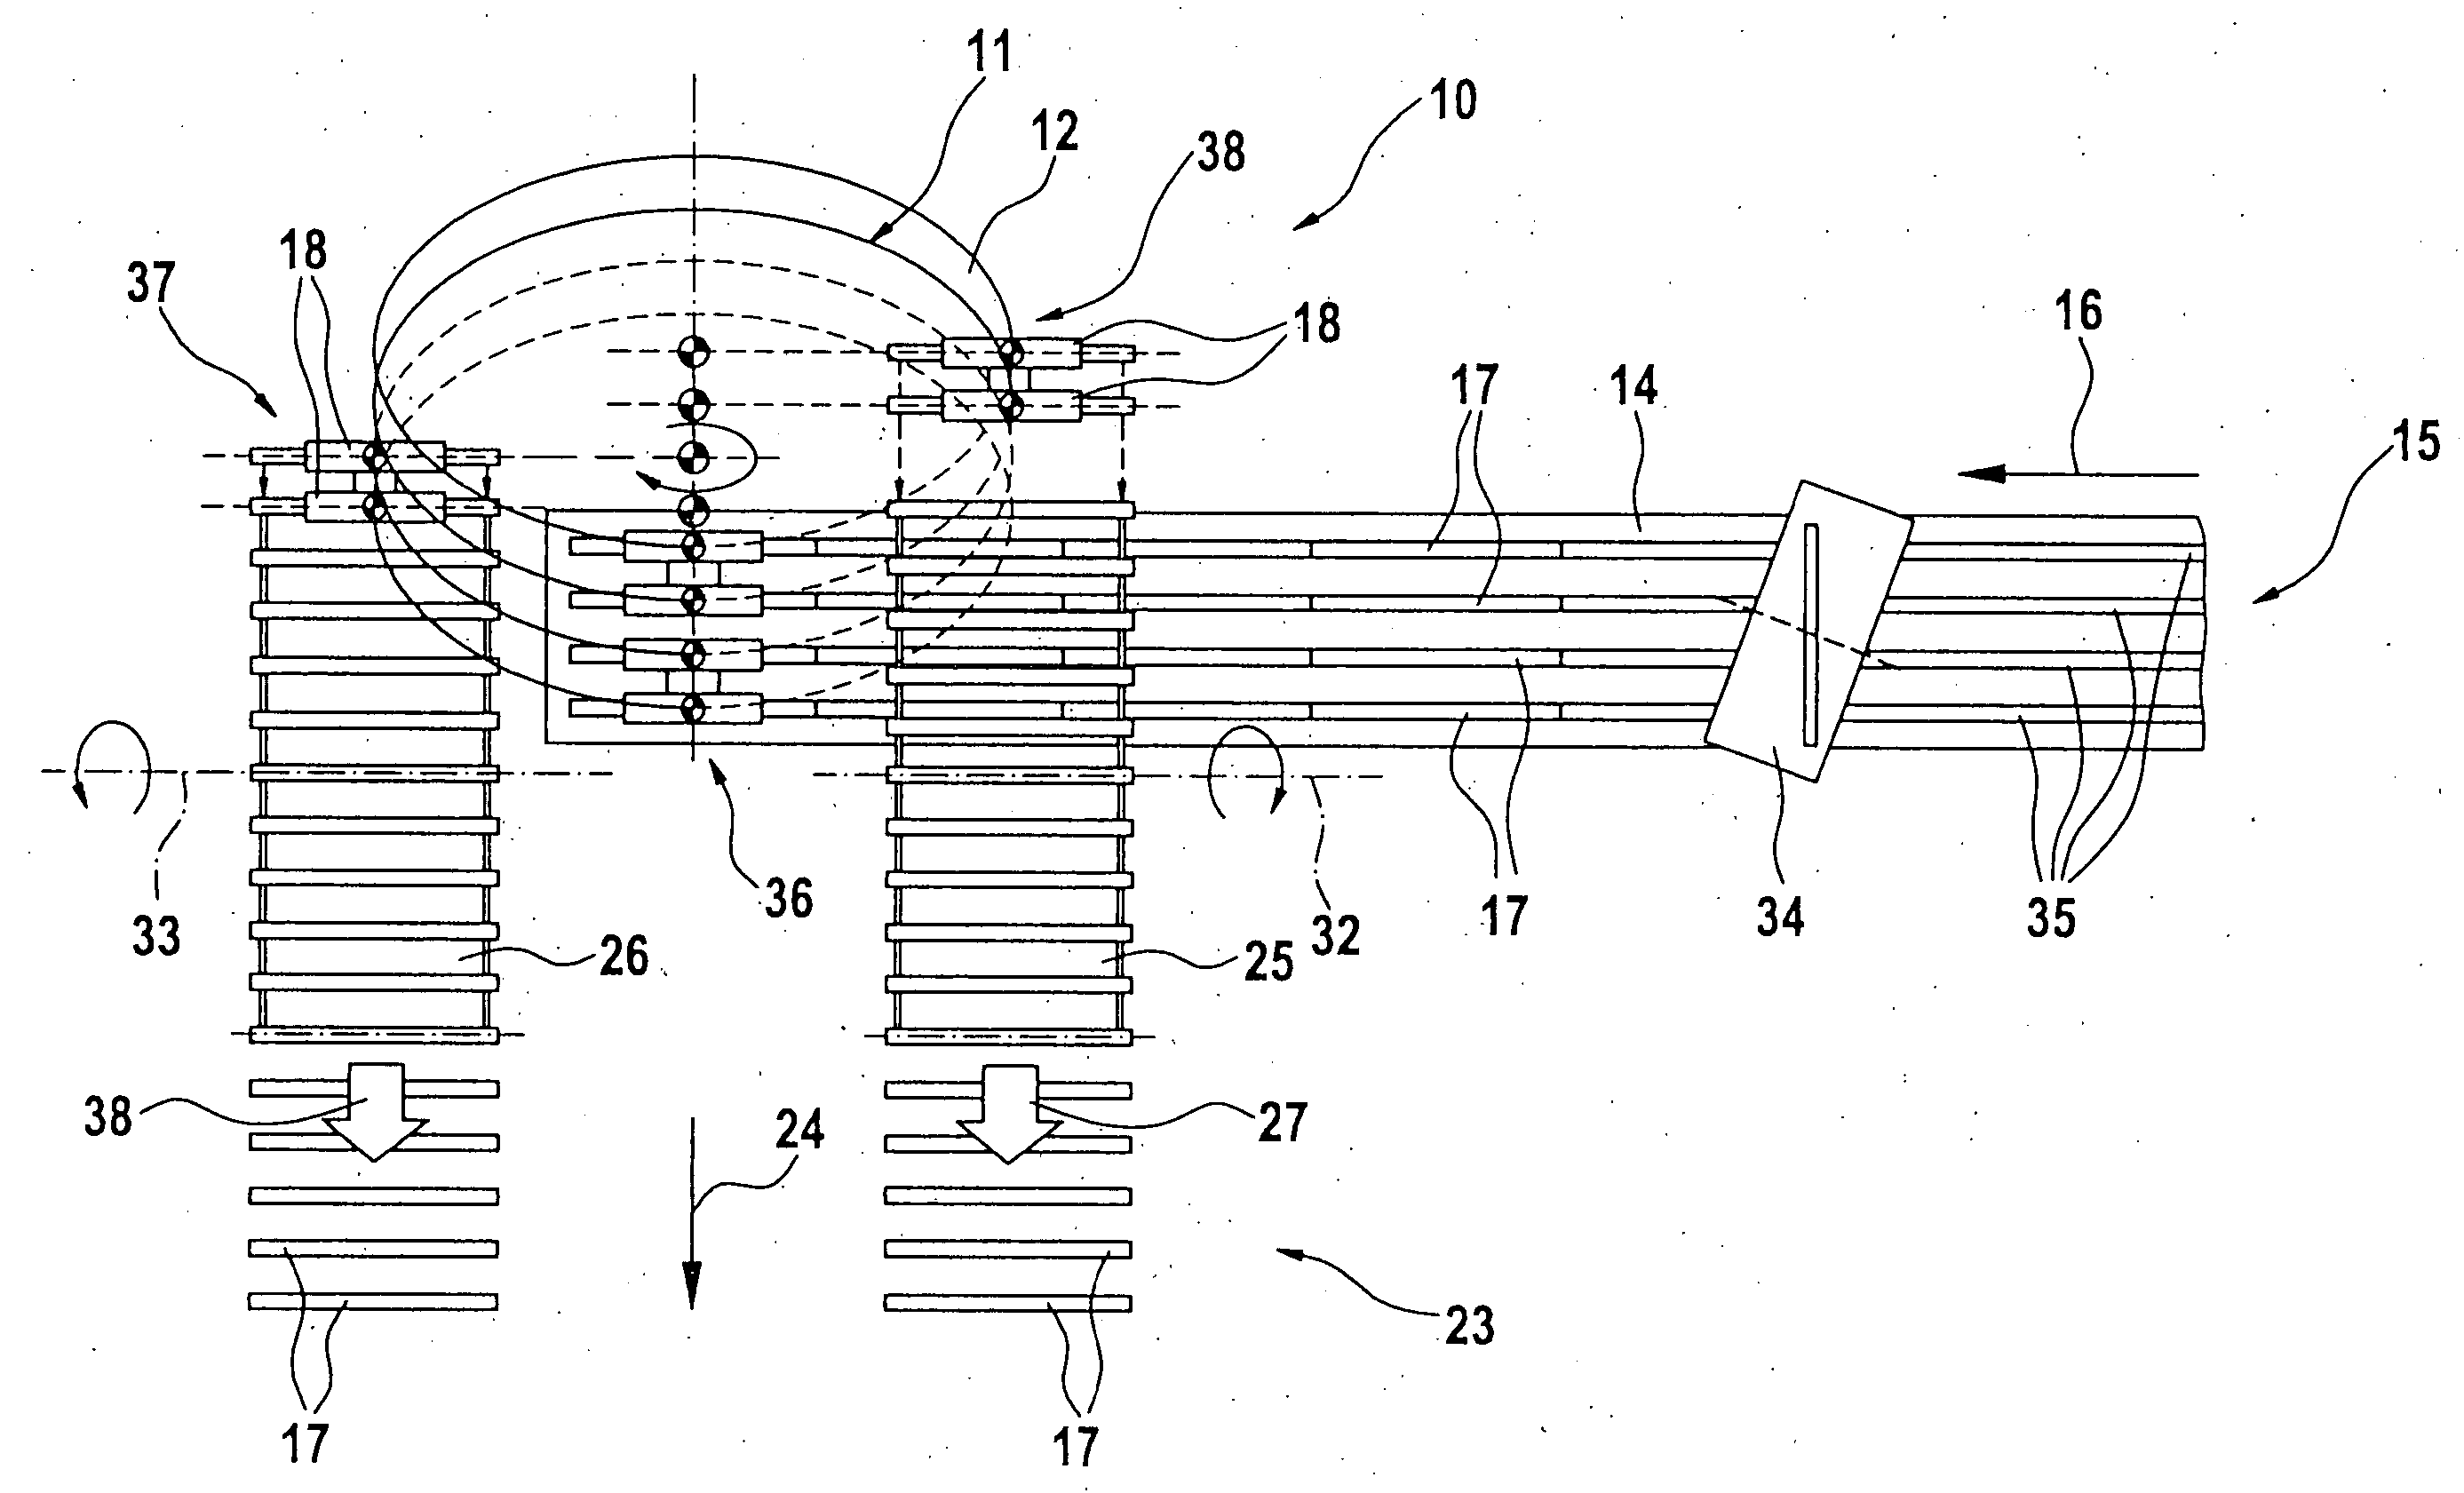 Apparatus and method for the transfer of rod-shaped articles